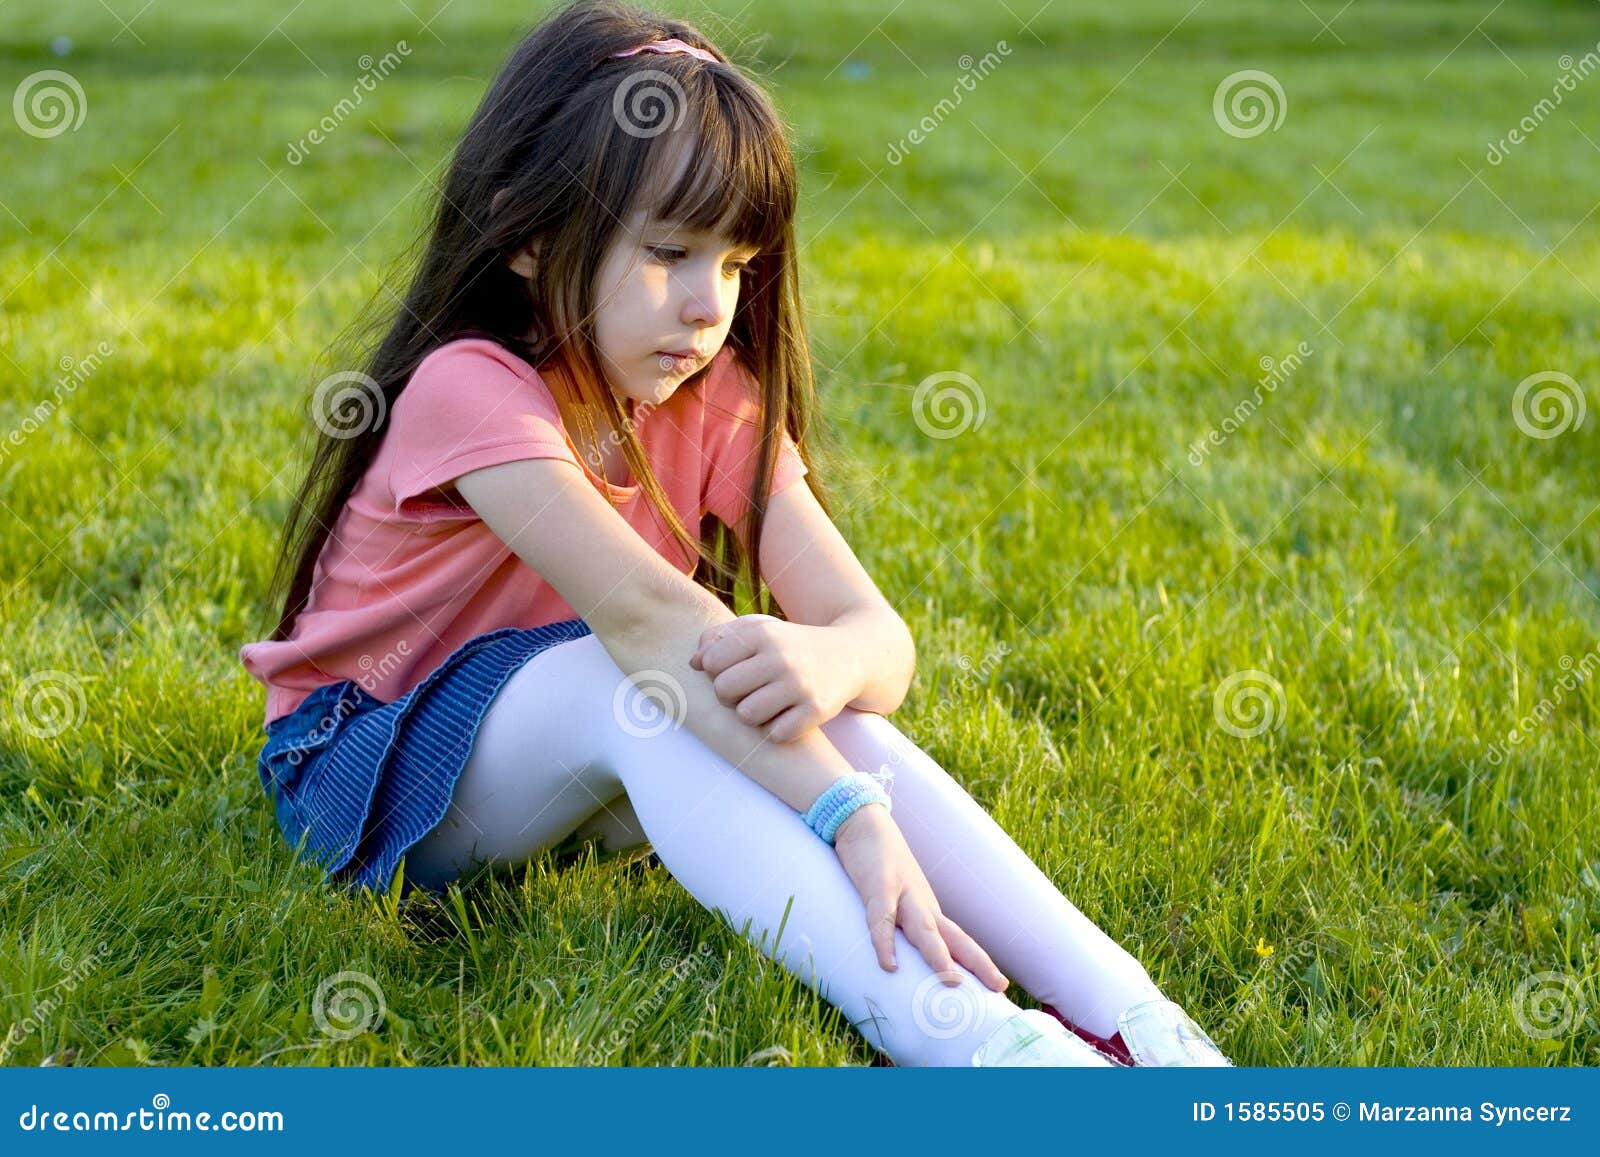 Sad little girl. stock image. Image of distressed, fearful - 1585505